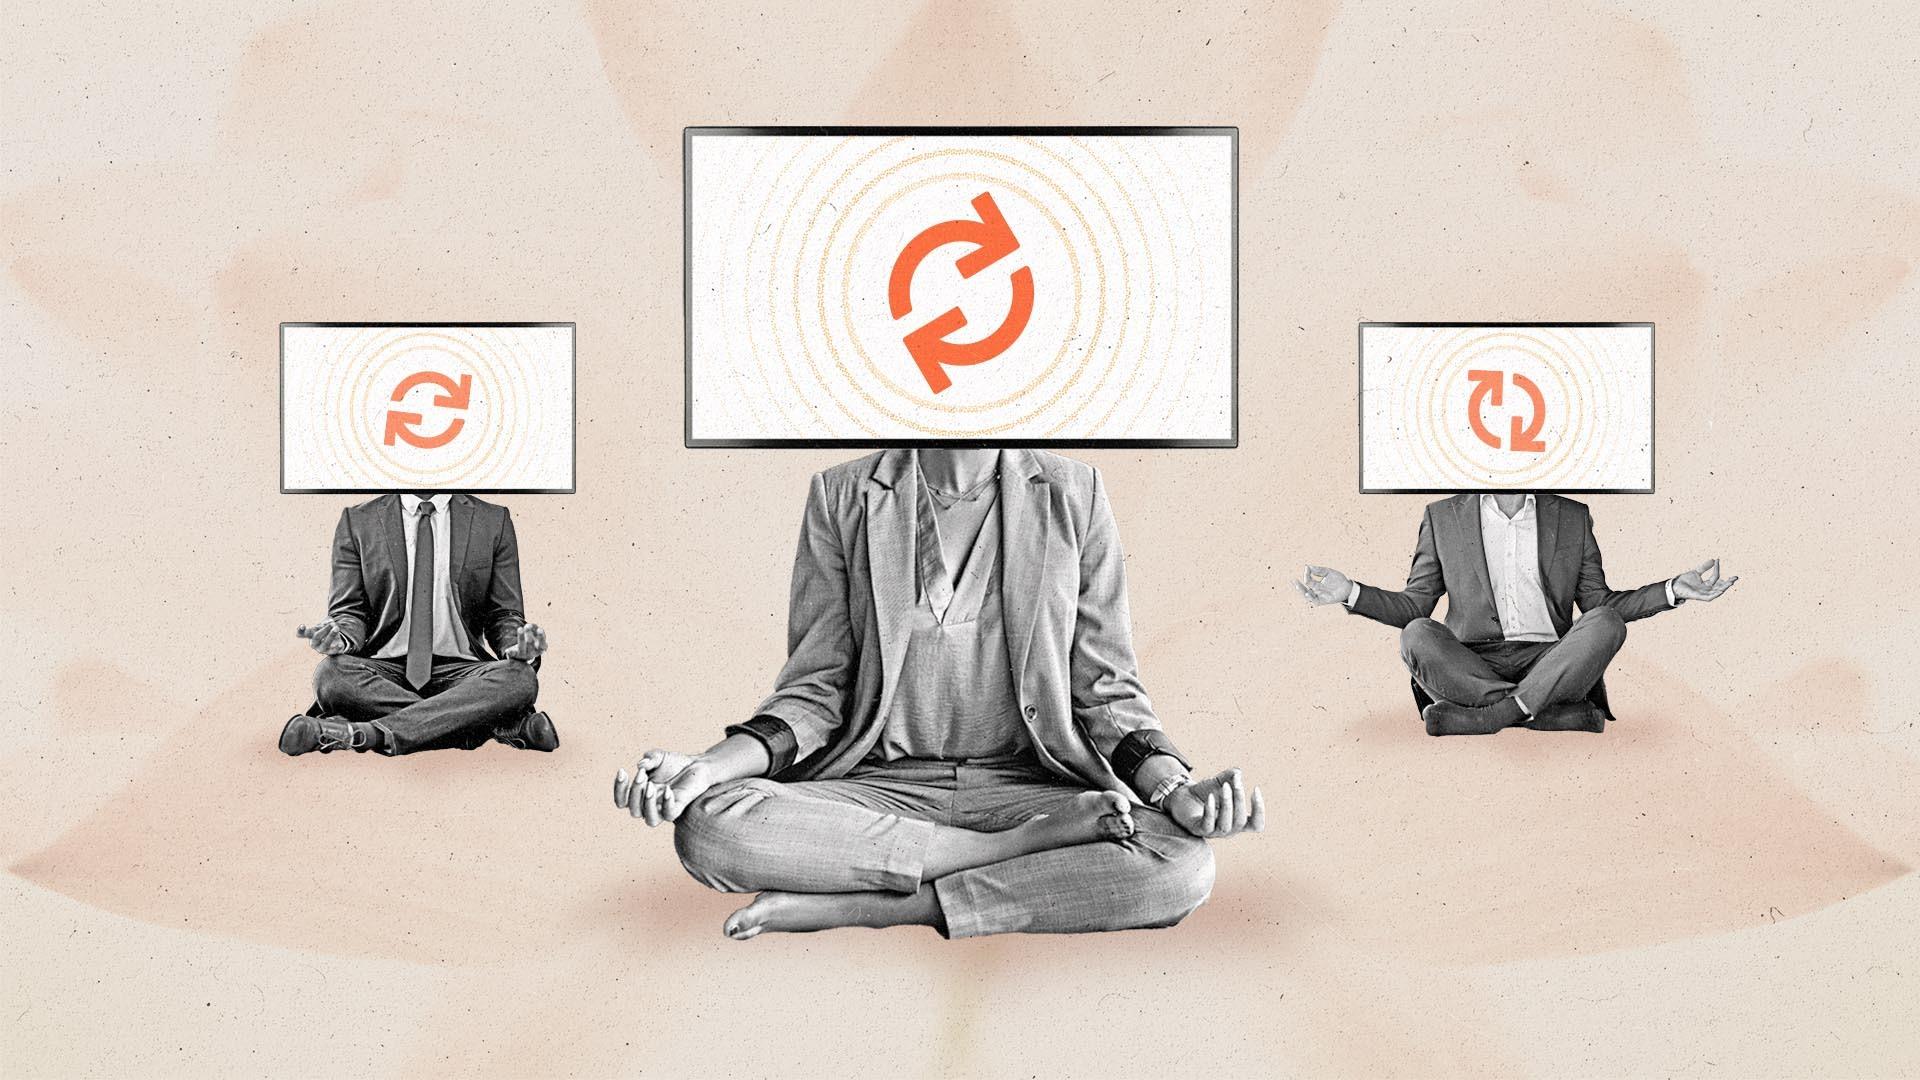 Three people with connected TV heads wearing business attire sit in meditation pose.